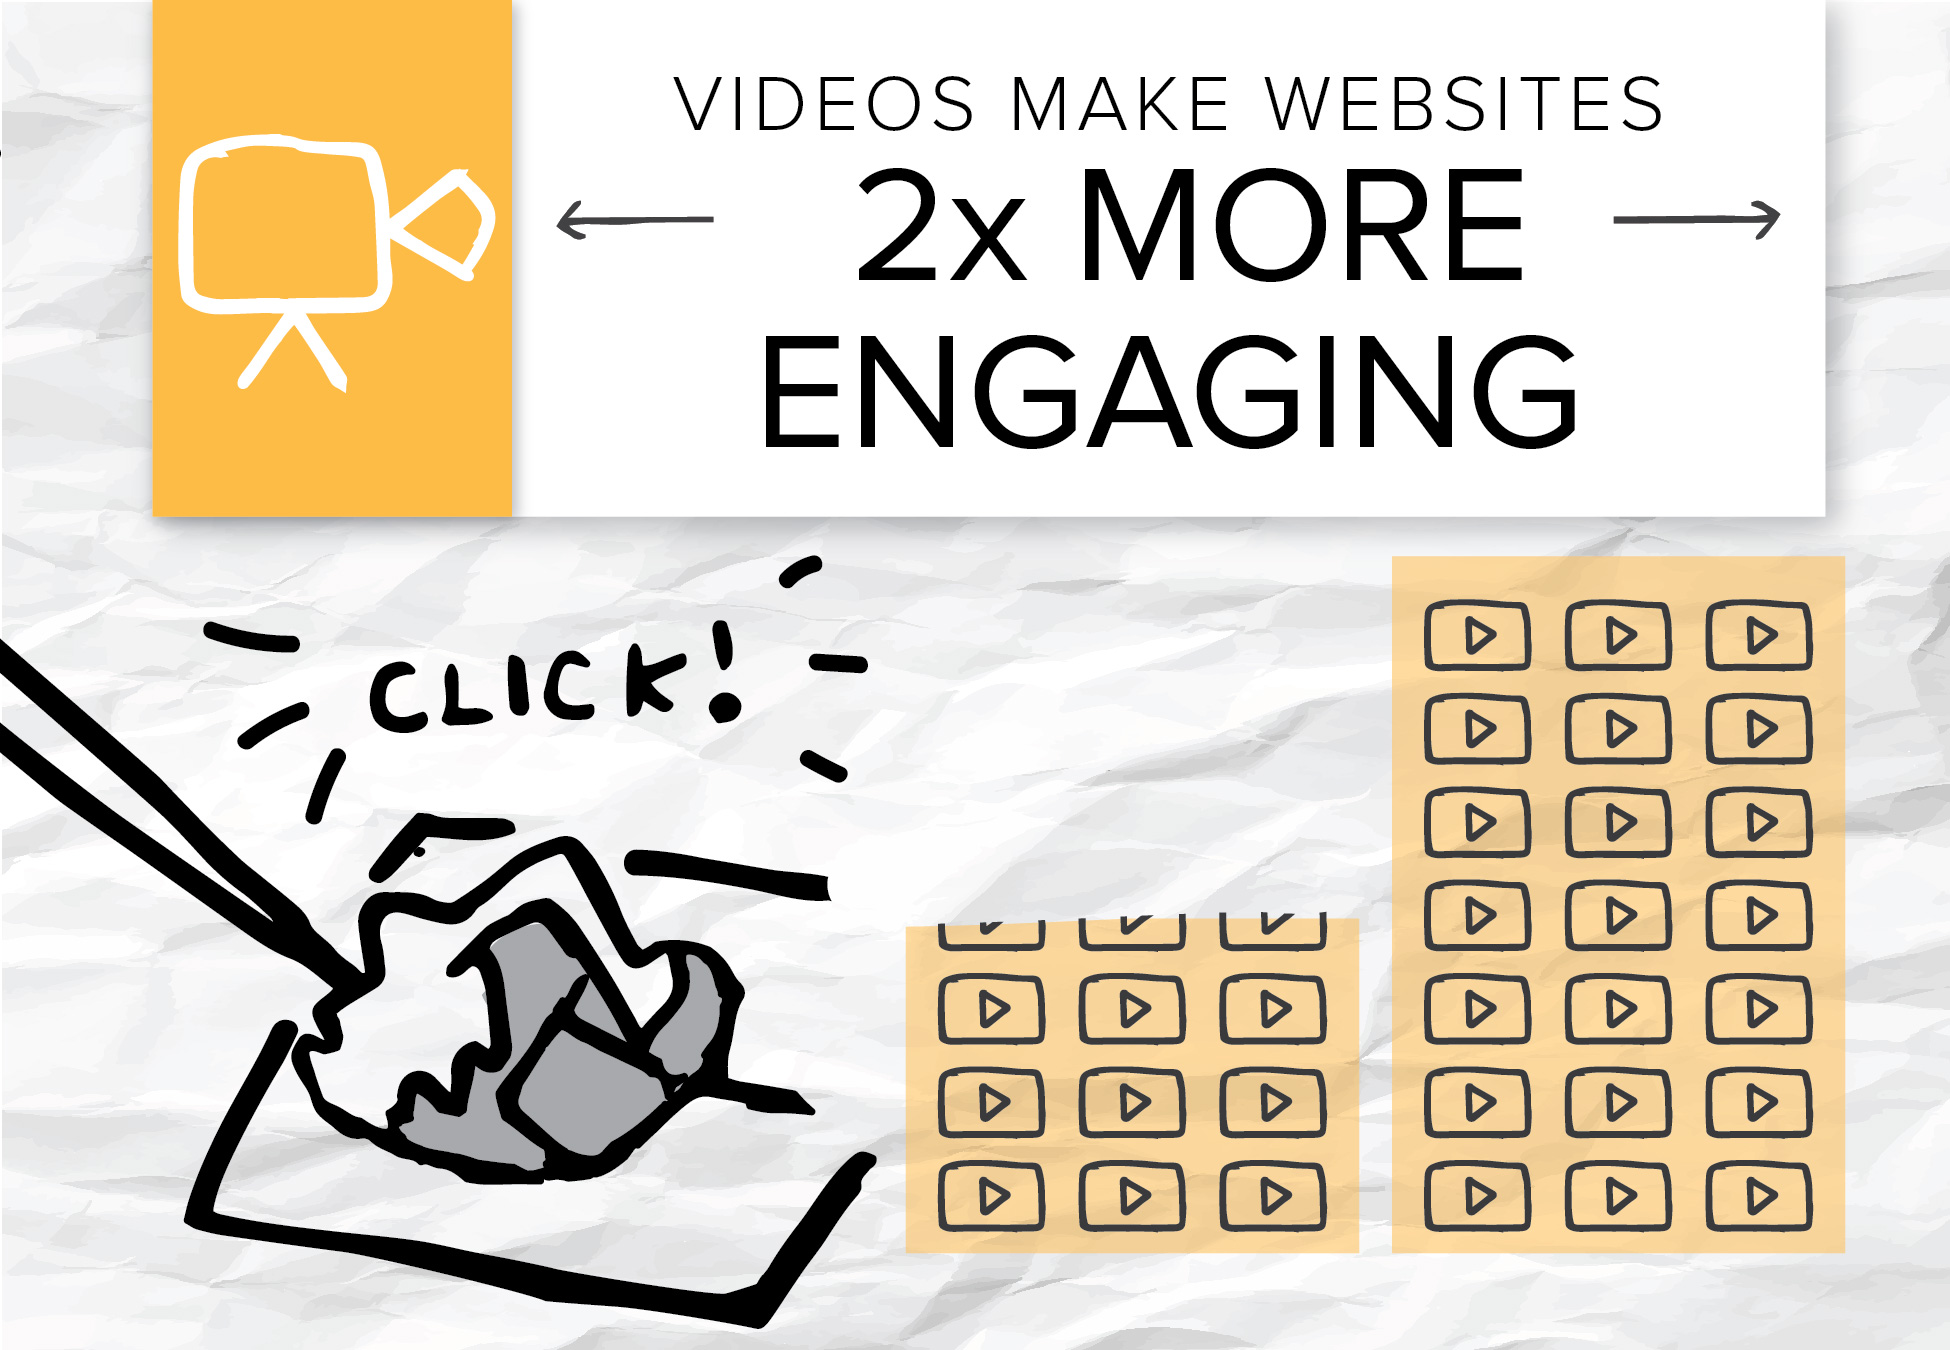 One of our clients in the human resources industry increased its website engagement when it added videos to its site.